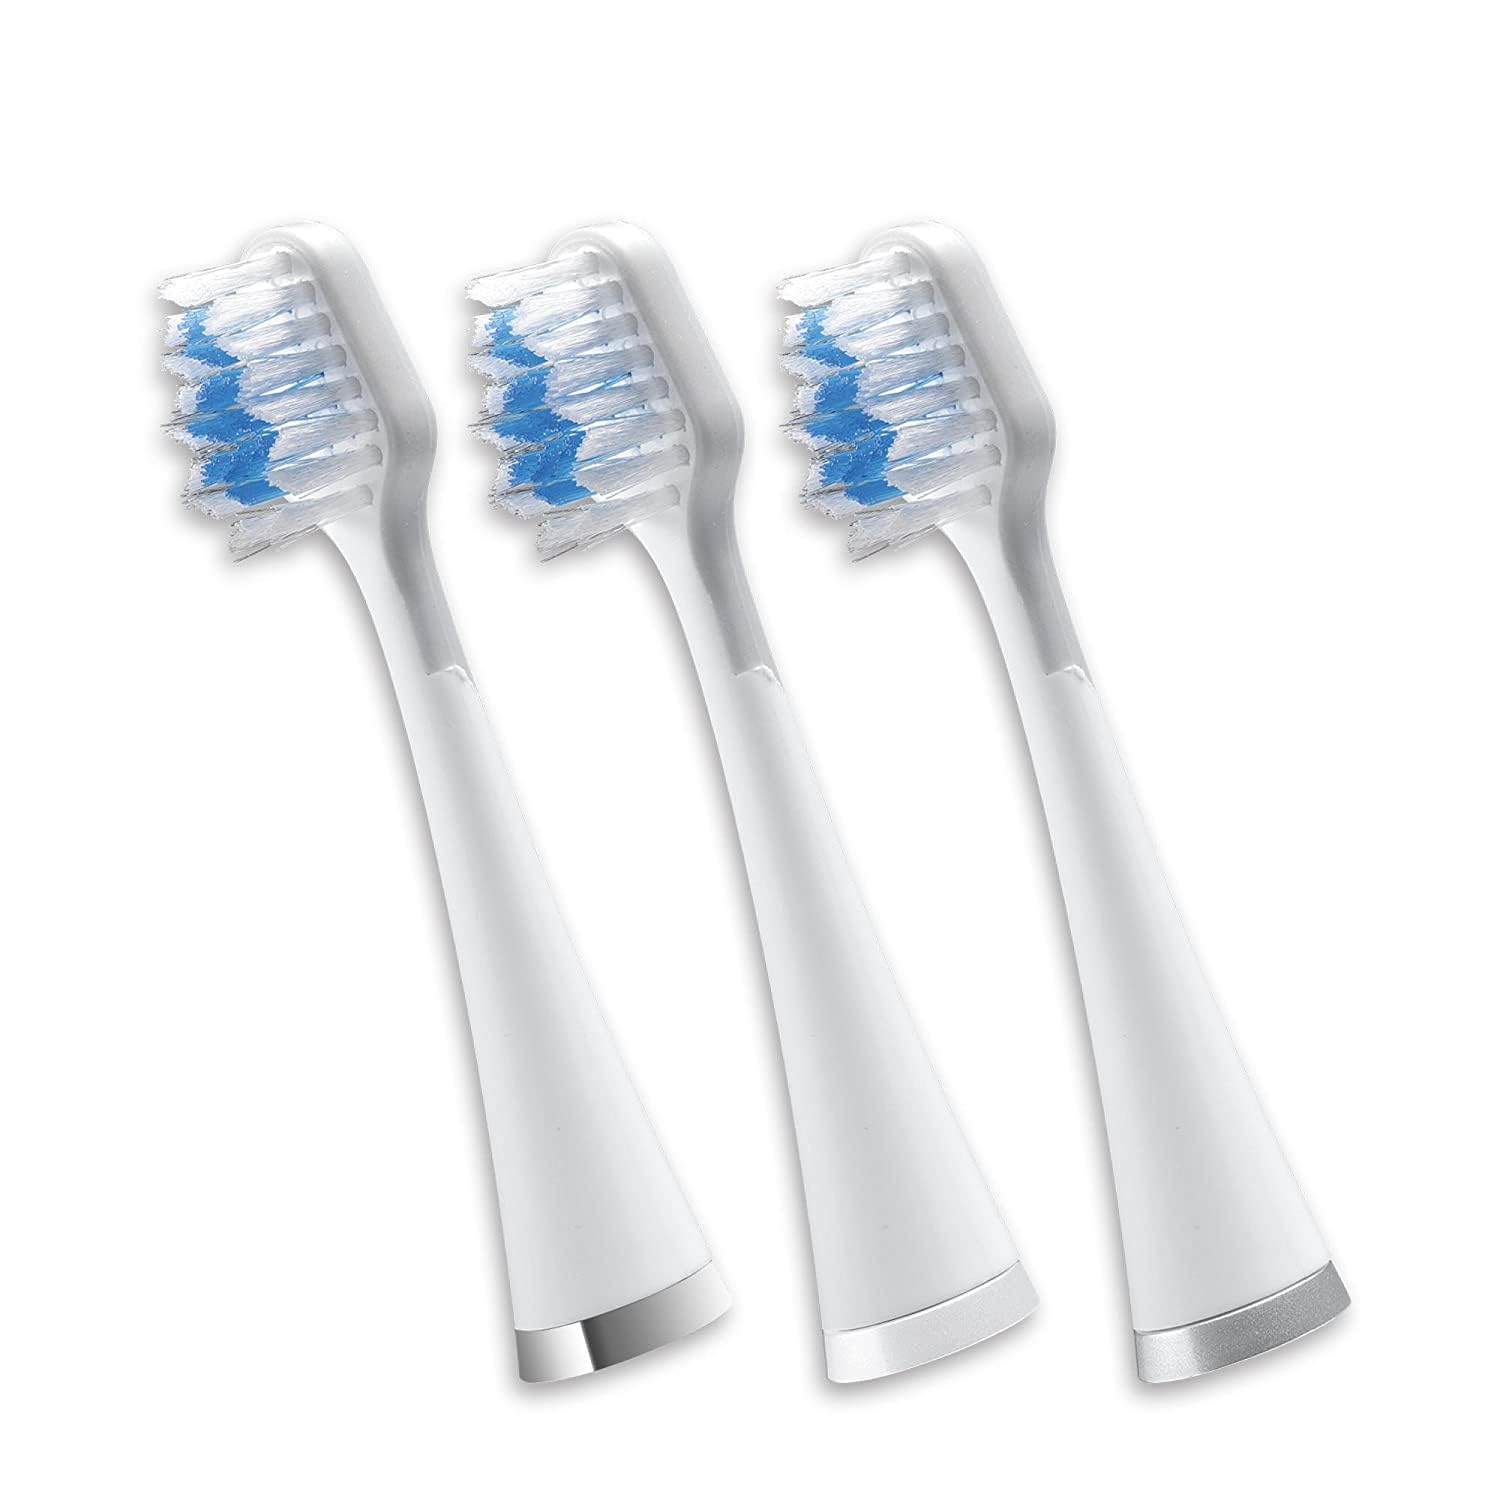 Waterpik Triple Sonic Replacement Brush Heads, Complete Care Replacement Tooth Brush Heads, STRB-3WW, 3 Count (Pack of 1), White